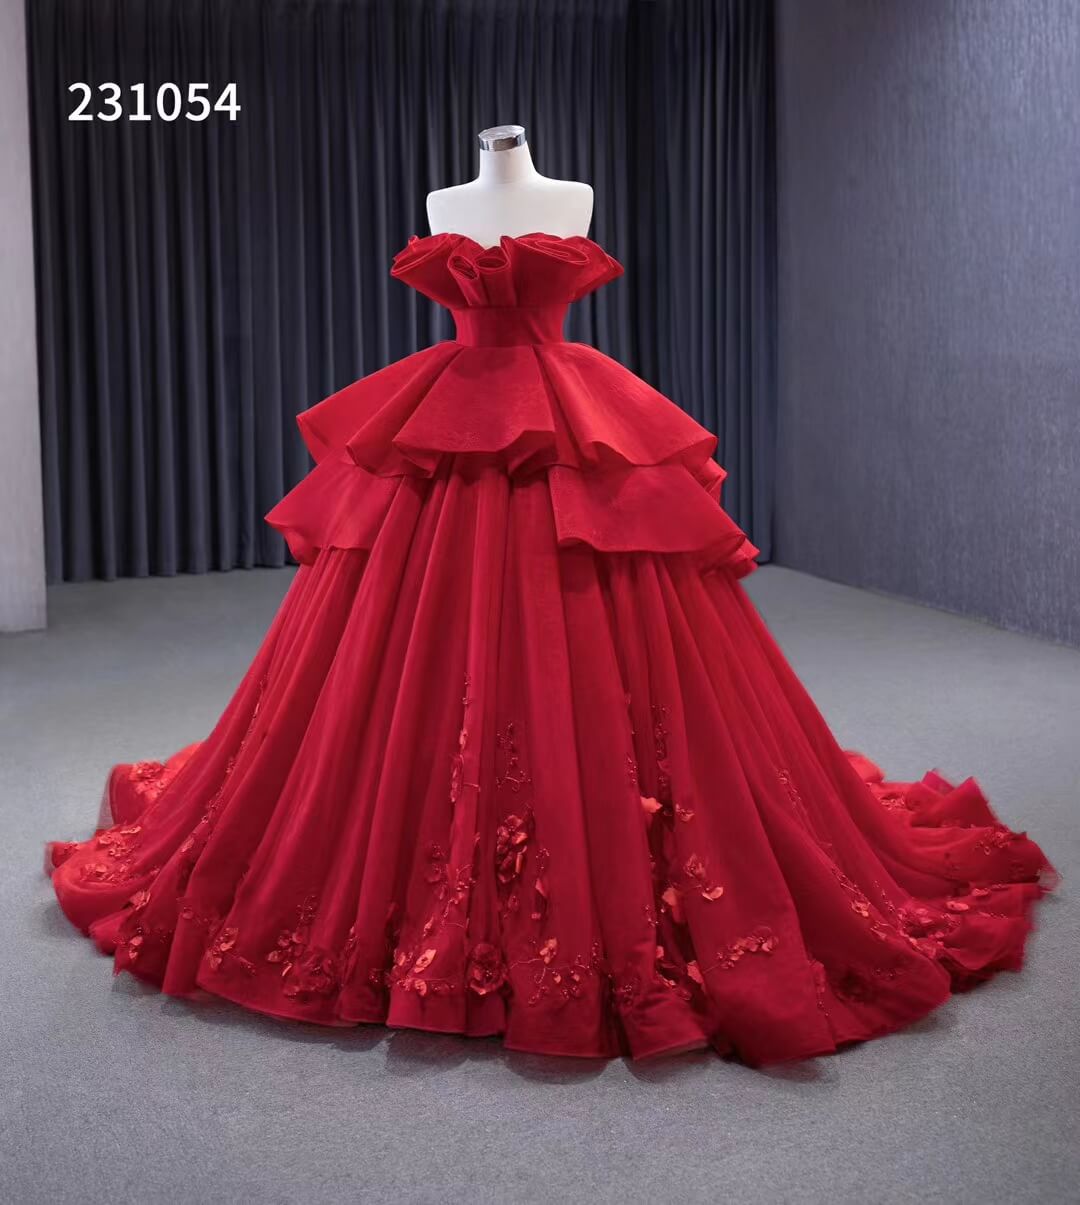 Red Off the Shoulder Sweet 16 Ball Gowns Ruffled Wedding Dresses with Flowers 231054-Quinceanera Dresses-Viniodress-Viniodress